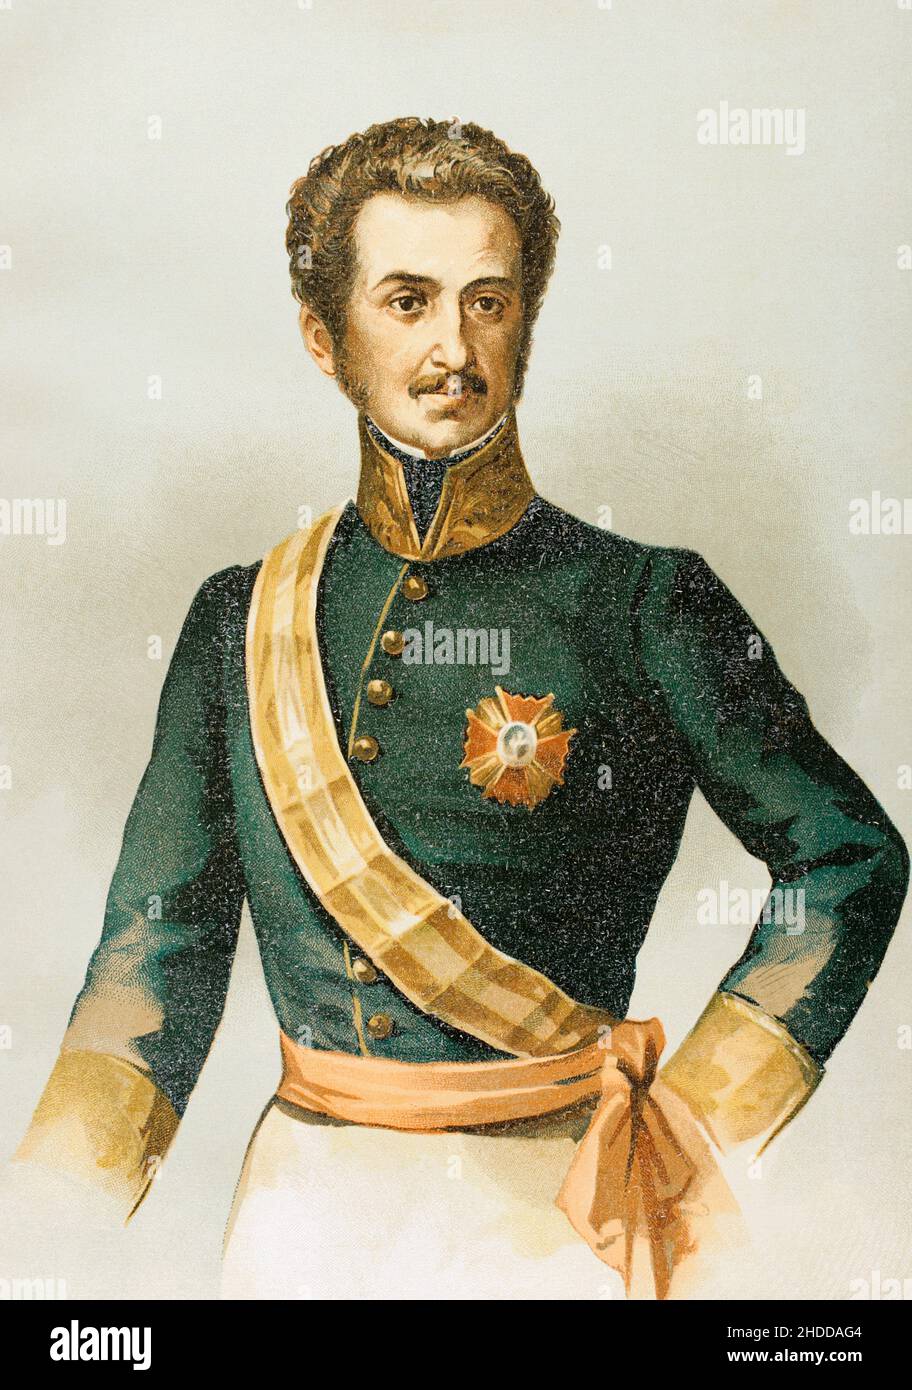 Luis Fernández de Córdoba y Valcárcel (1798-1840). Spanish lieutenant general. Of absolutist ideas, during the reign of Ferdinand VII he uprised against the government during the Liberal Triennium, being one of the promoters of the failed uprising of the Royal Guard in Madrid on 7 July 1822, which forced him to go into exile in France. Portrait. Chromolithography. 'Historia General de España' (General History of Spain) by Miguel Morayta. Volume VII. Madrid, 1893. Stock Photo